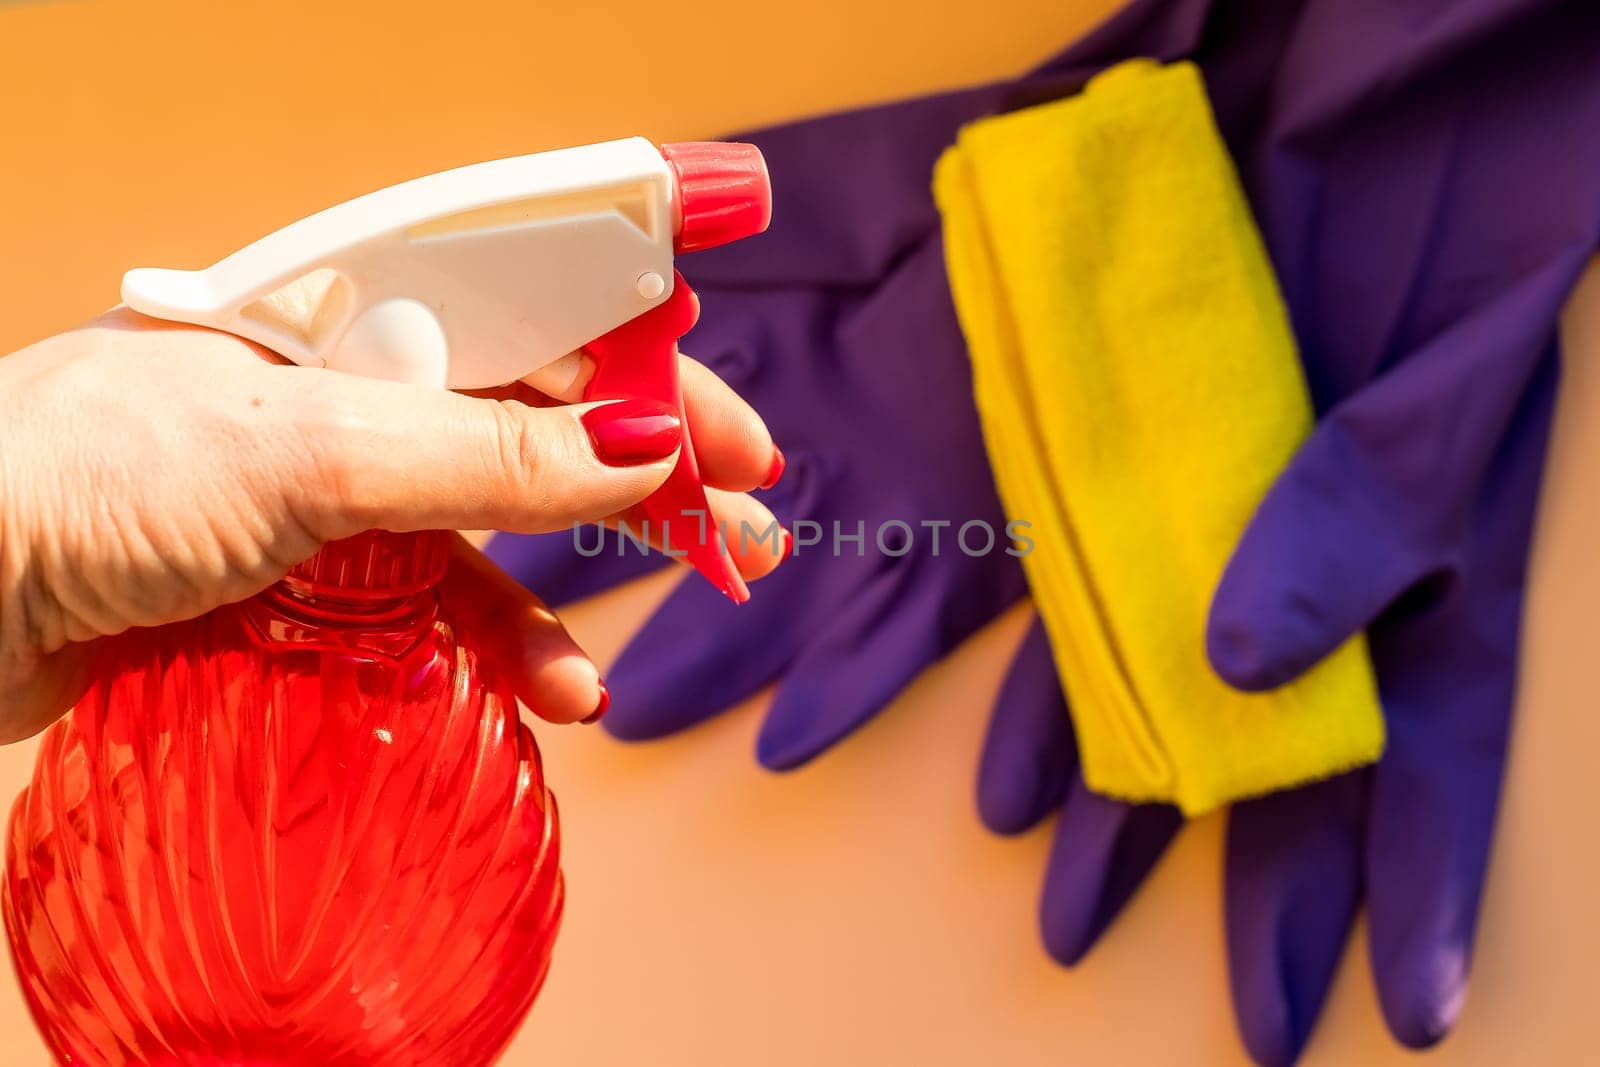 Cleaning equipment - gloves, sponge and rags on pastel background. Purity concept.